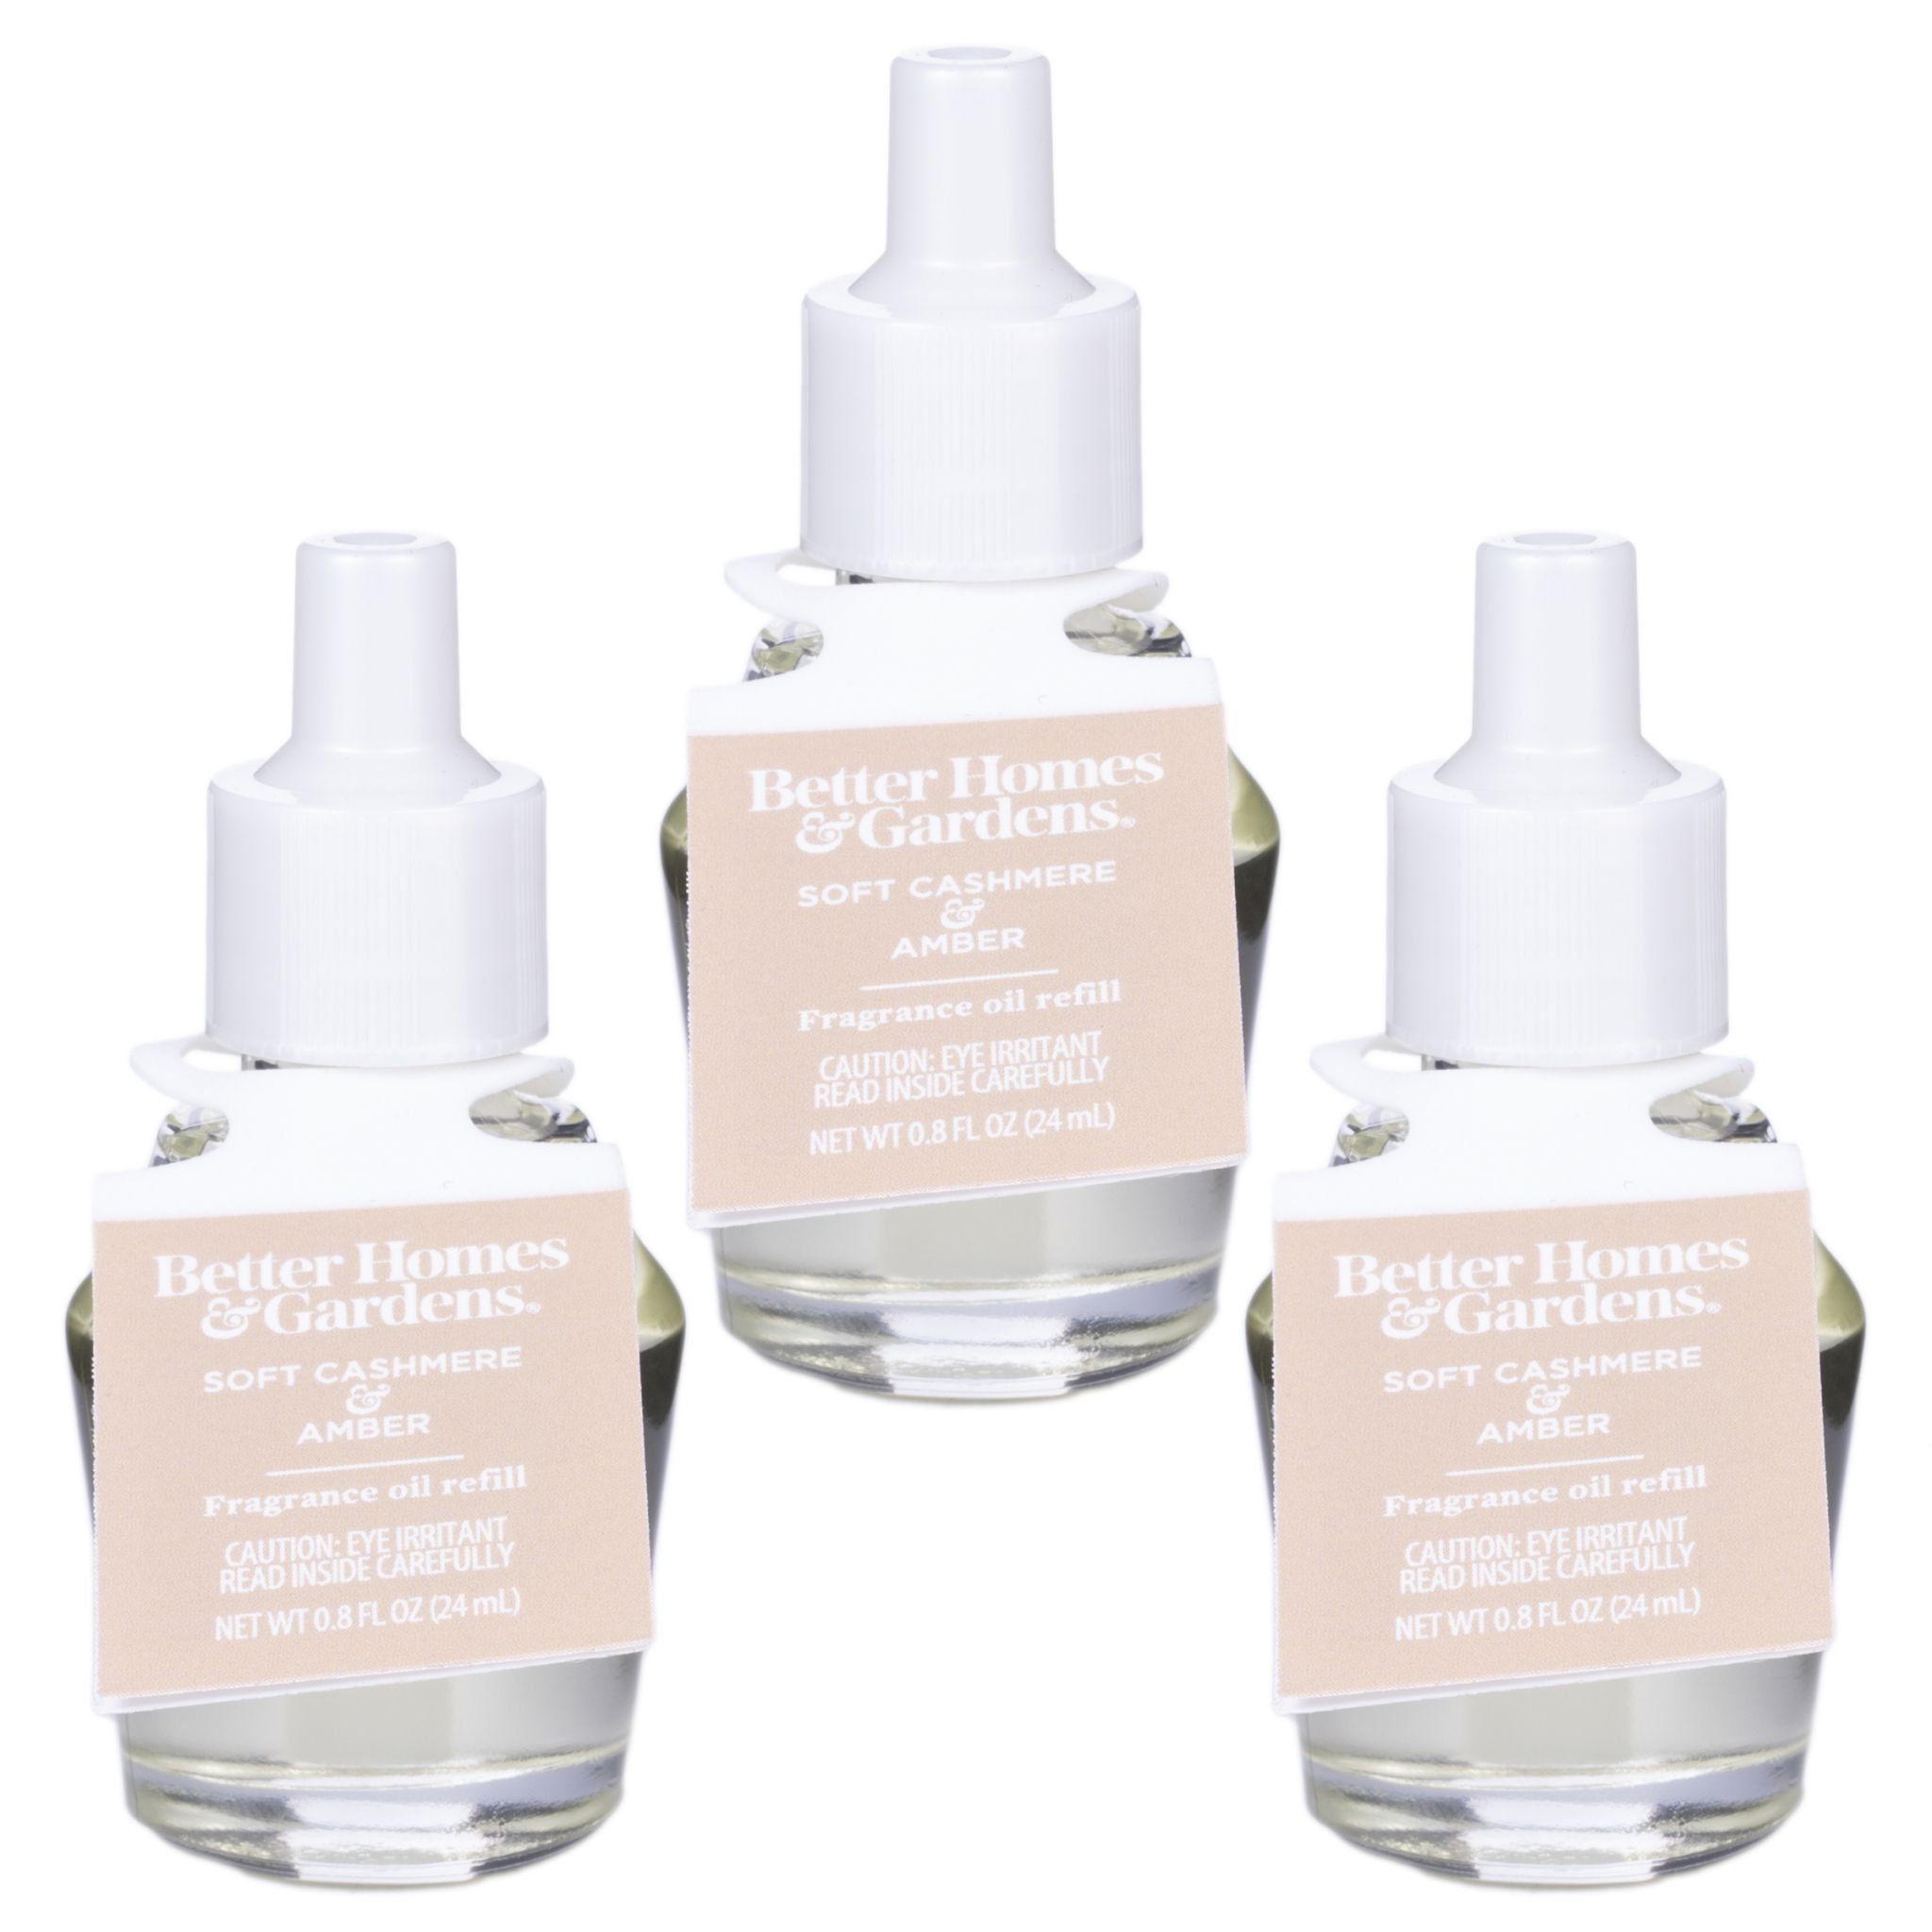 Better Homes & Gardens Aroma Accents Oil Refill 24 mL (3-Pack), Soft Cashmere Amber | Walmart (US)